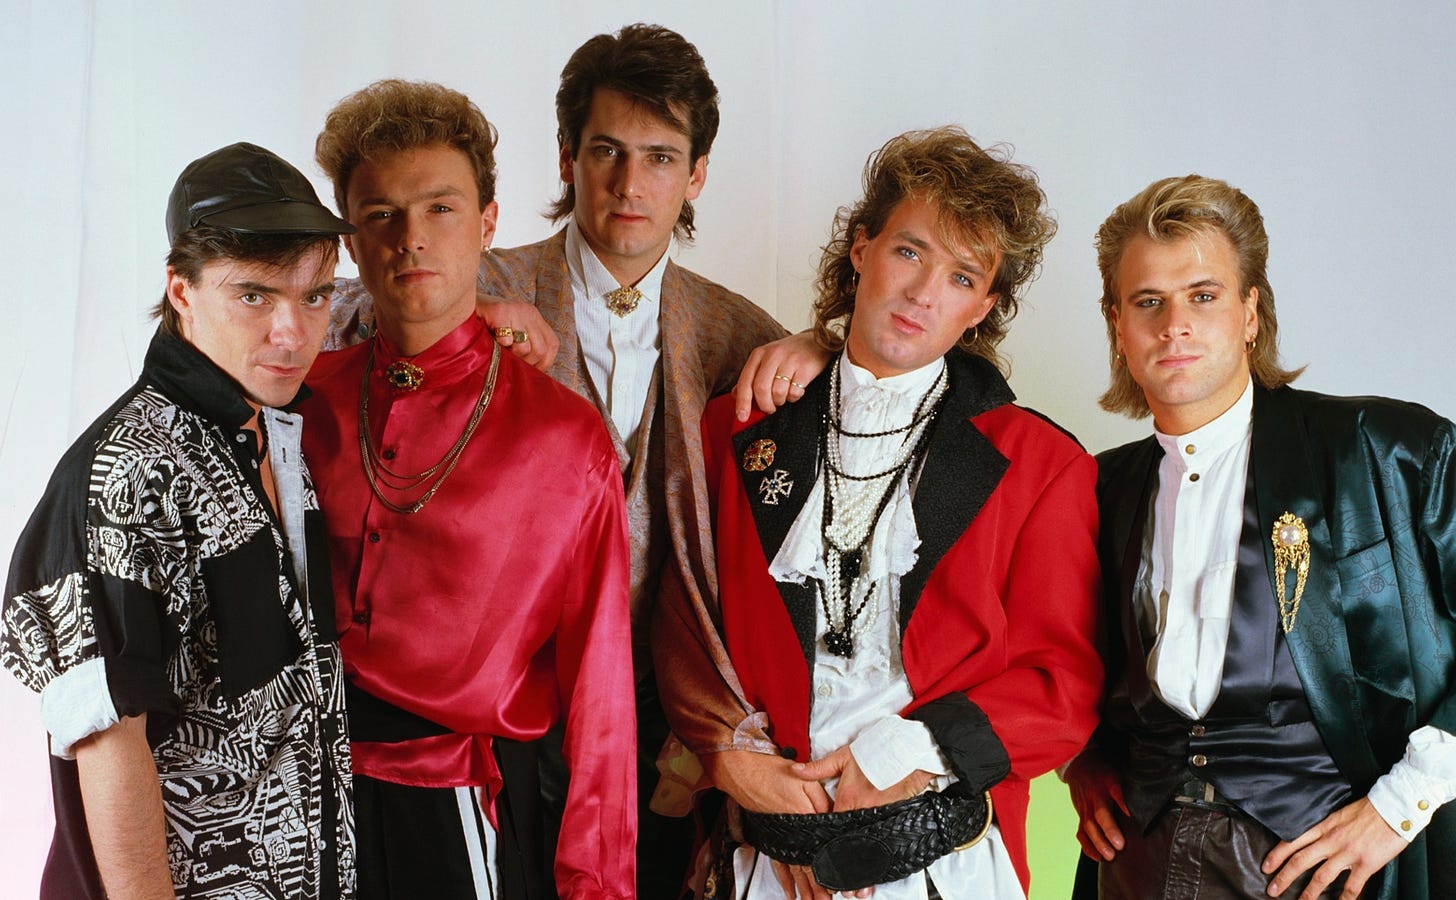 Spandau Ballet – Chant No.1 (I Don't Need This Pressure On) – in the 80s